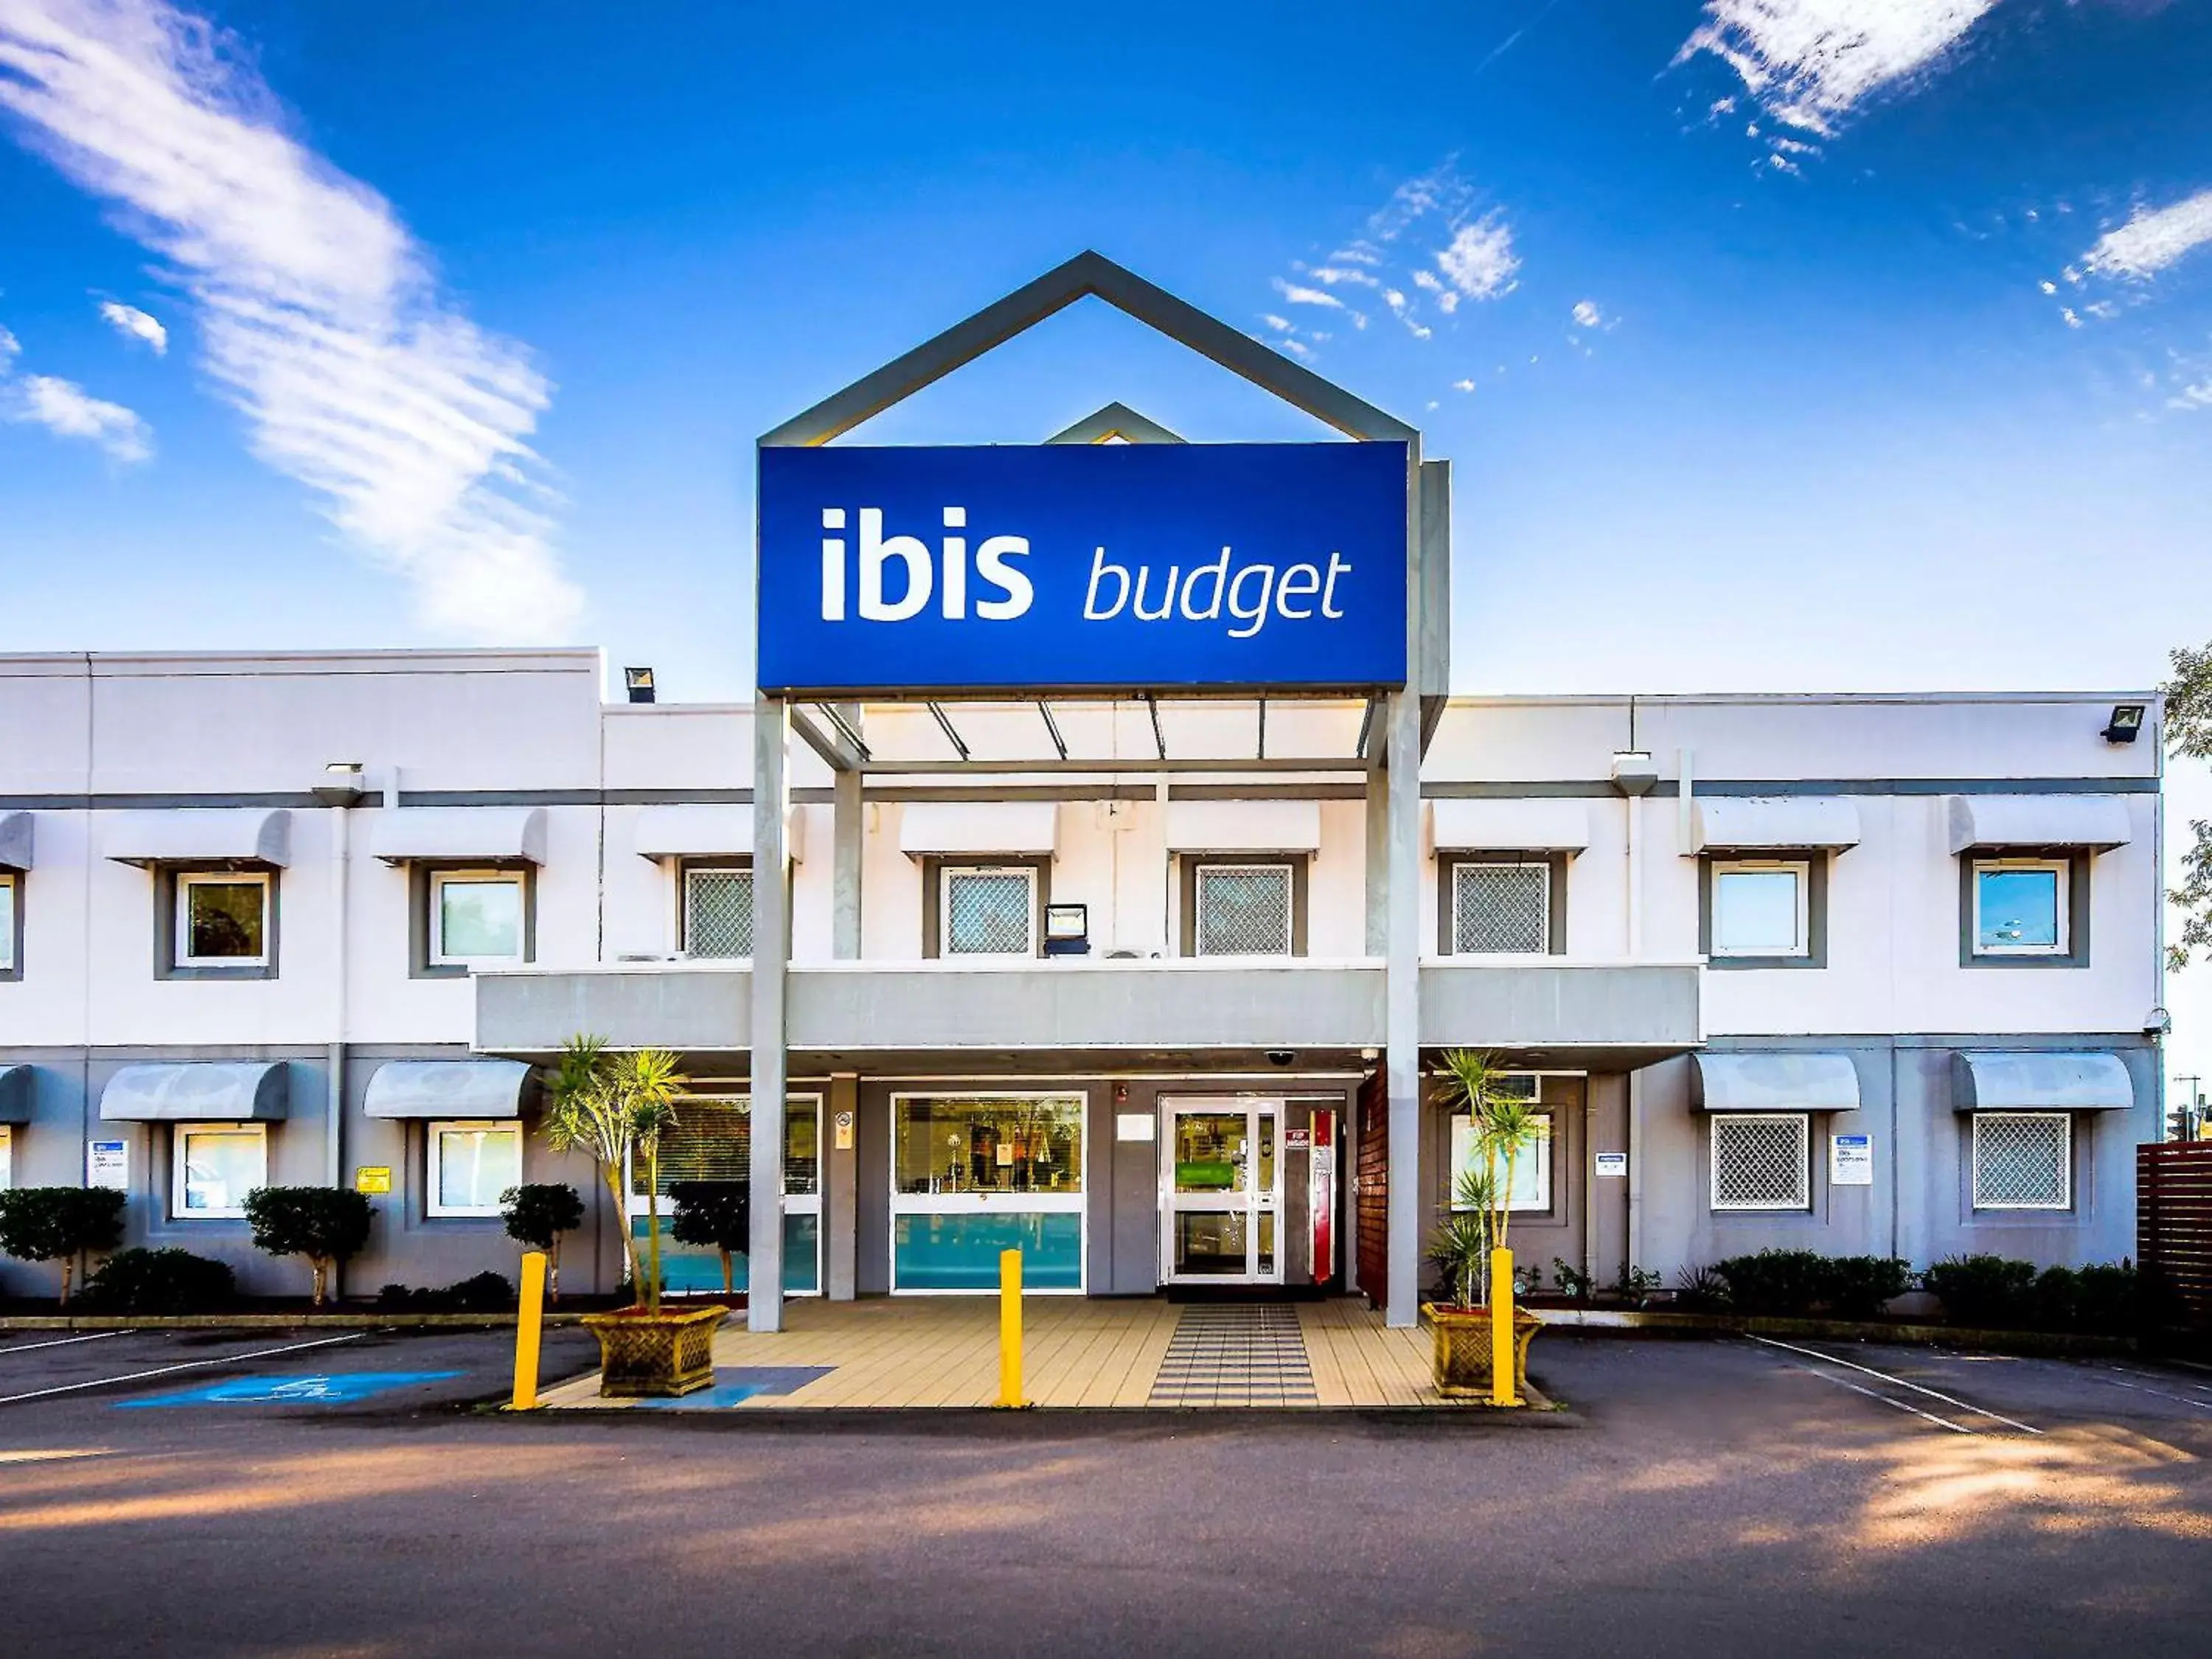 Property building in ibis Budget - Newcastle